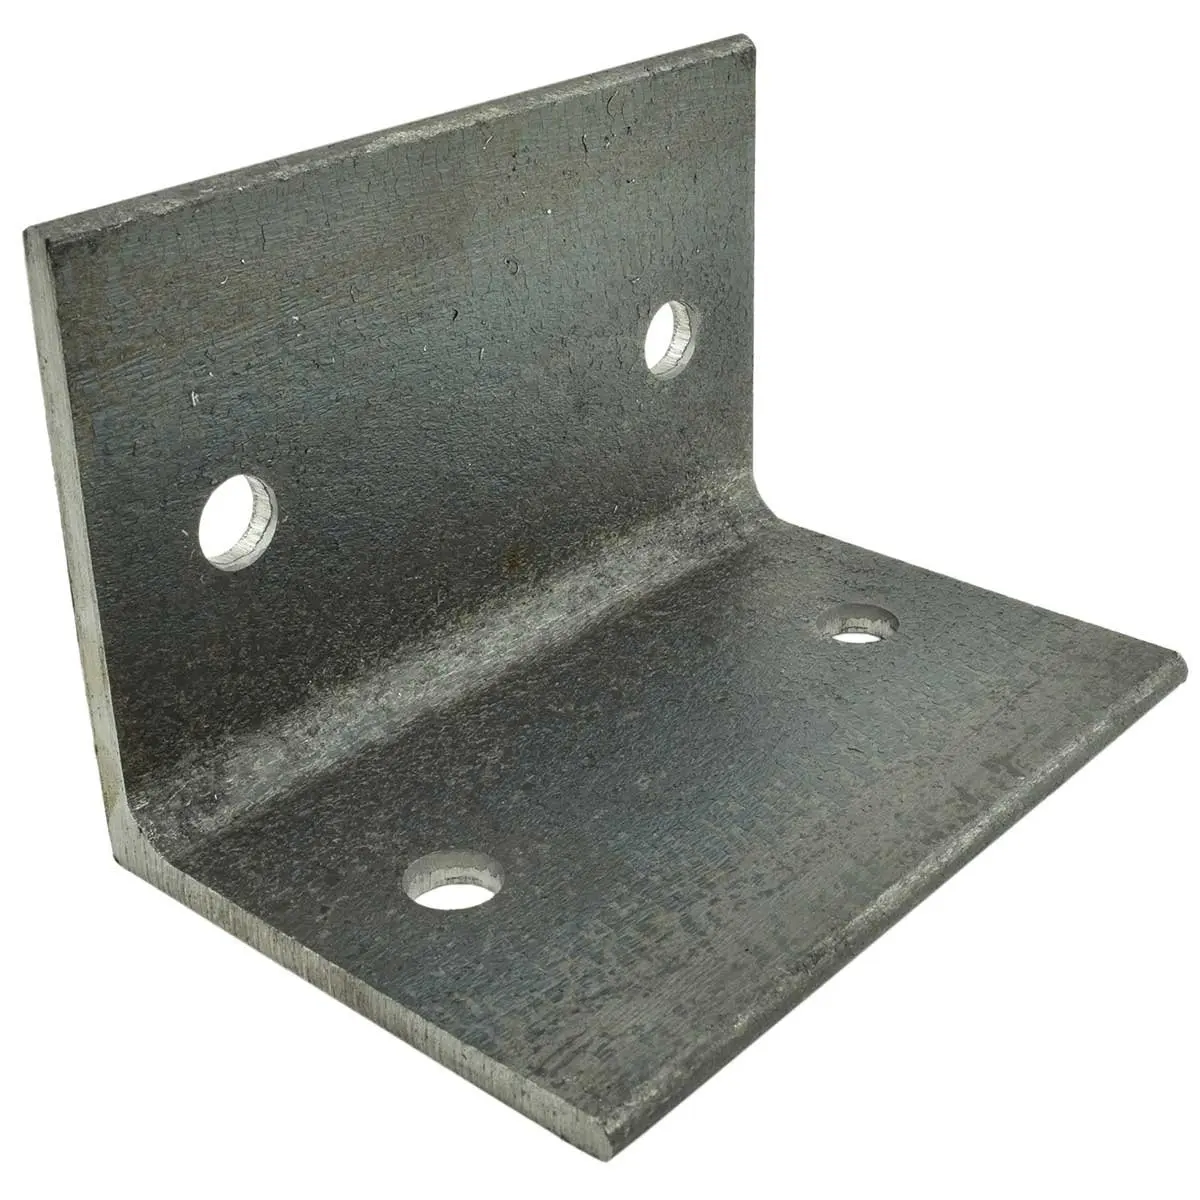 6 x 6 x 1/4 Hot Rolled A36 Steel Base Plate with Custom Fabricated 9/16 Holes for 1/2 Bolts 4